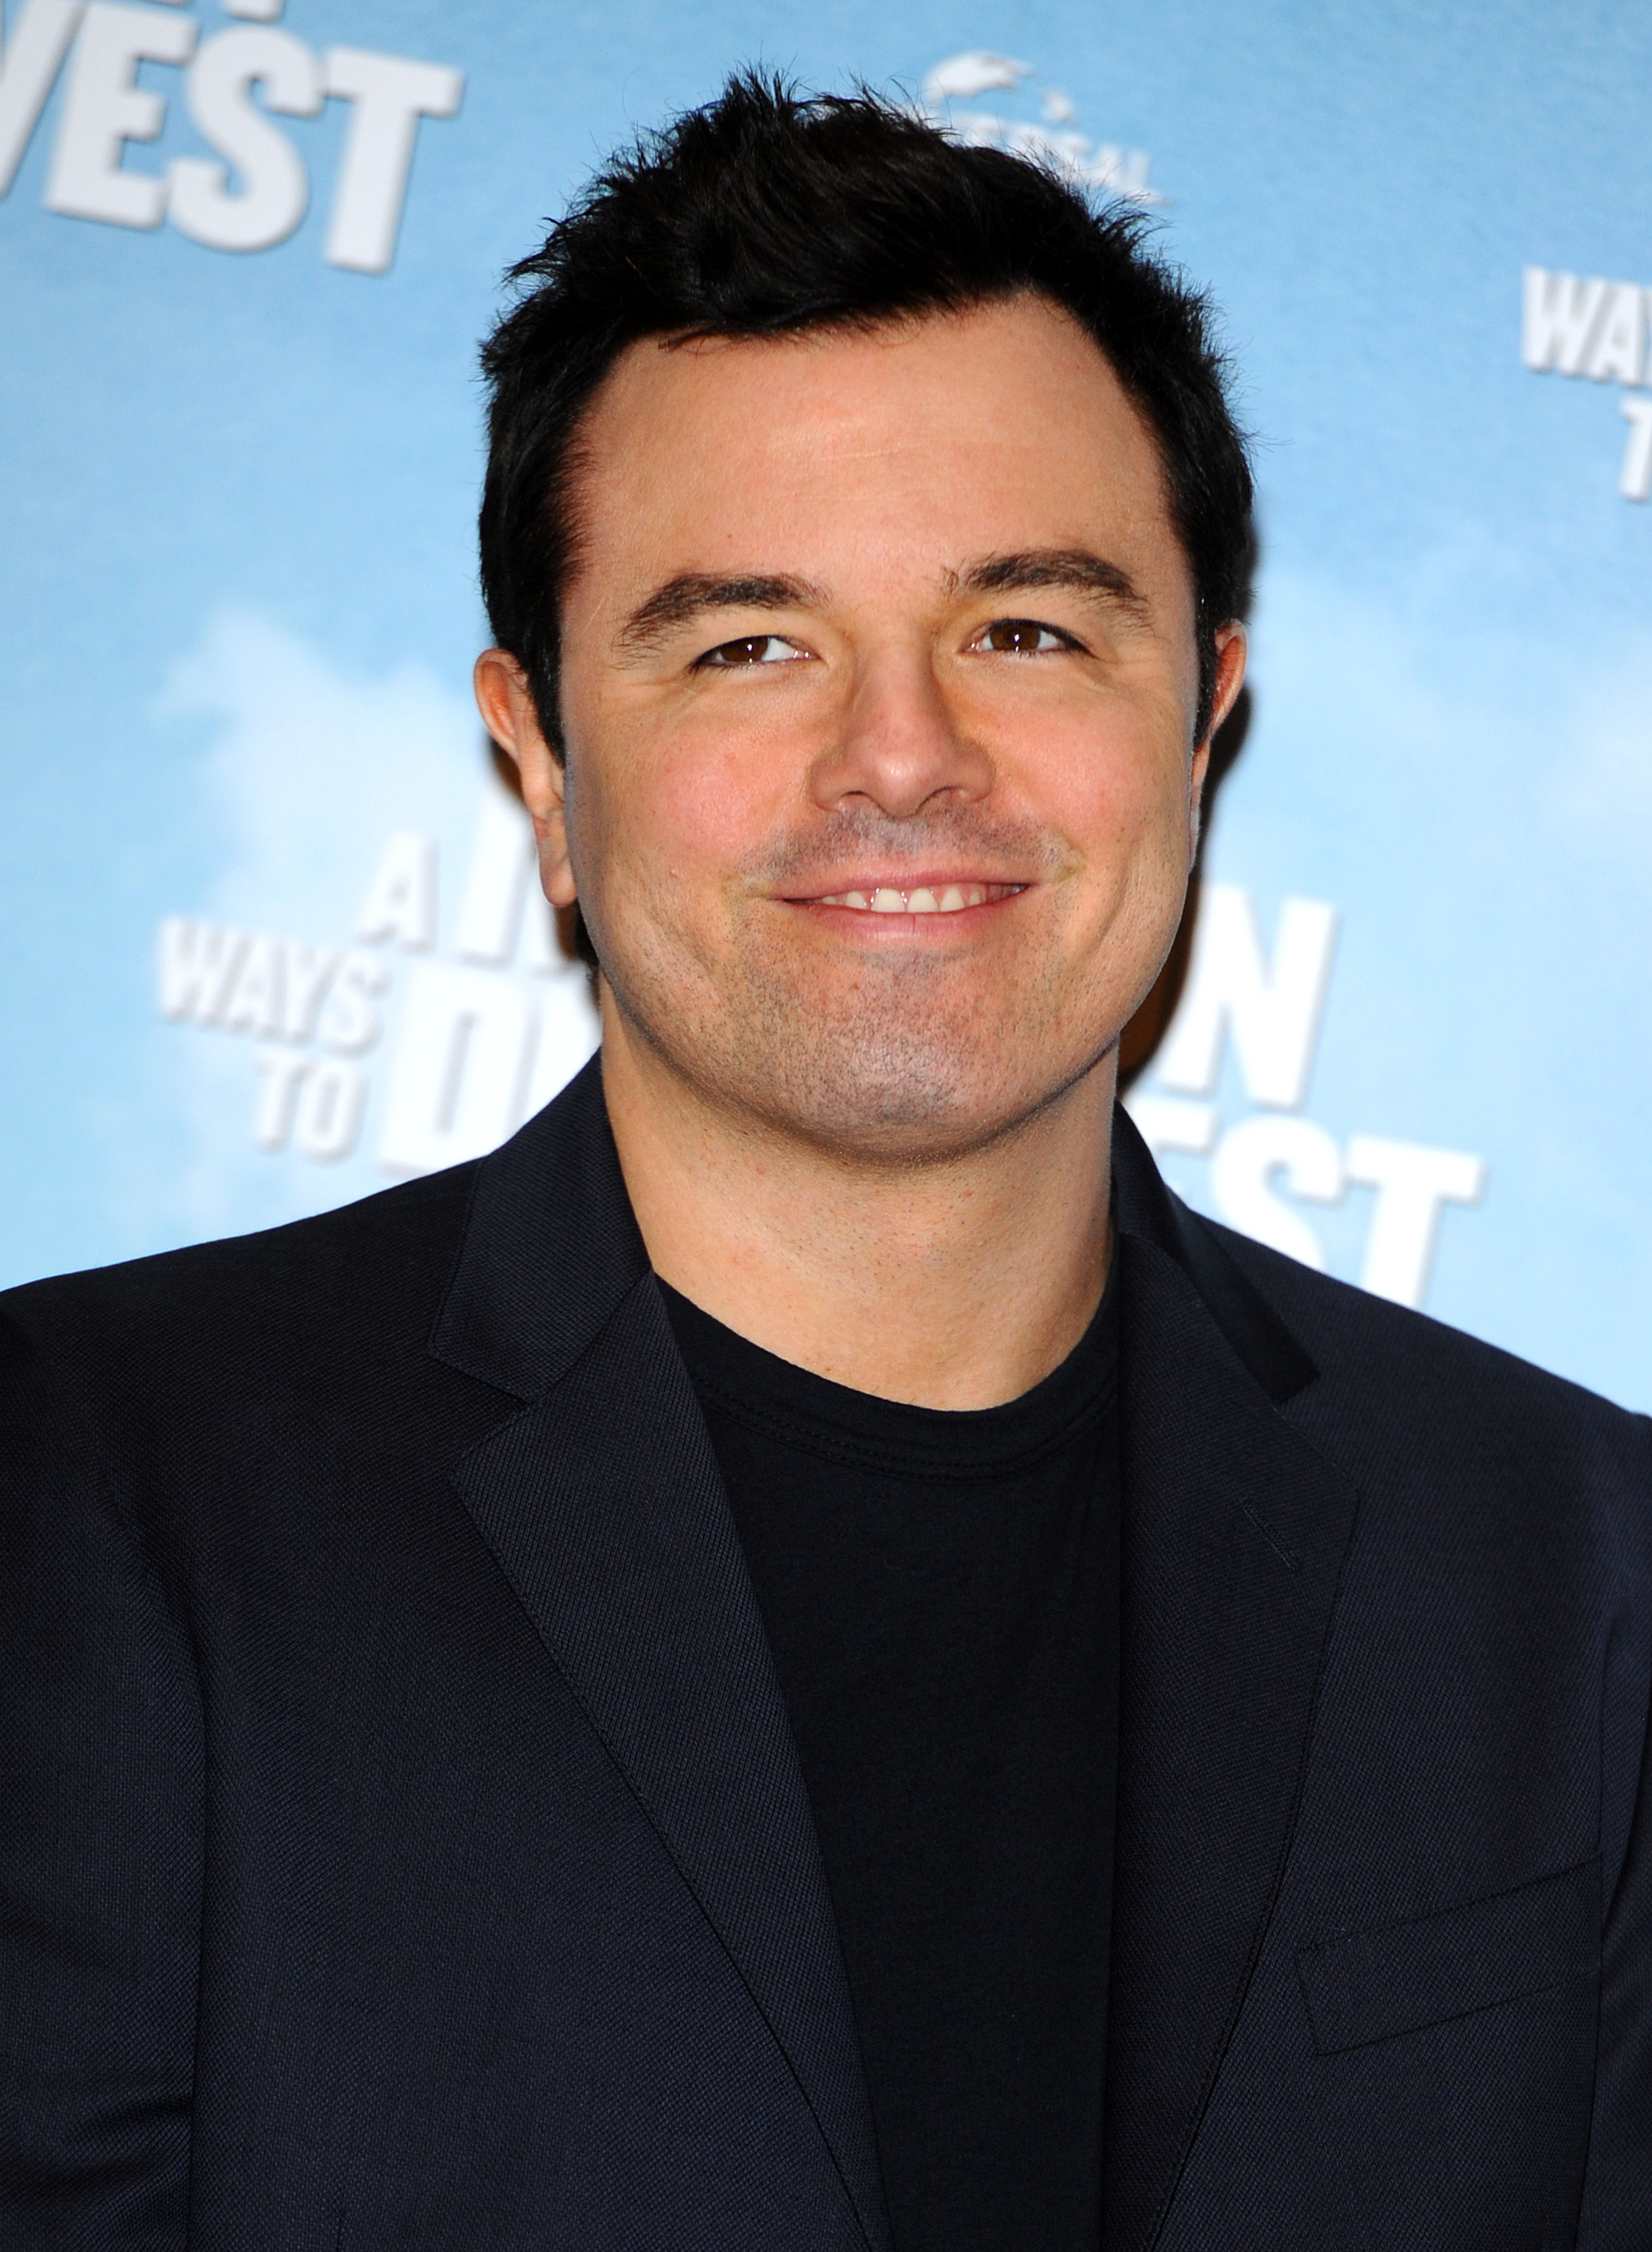 Seth Macfarlane attends a photocall to promote "A Million Ways To Die In The West" on May 27, 2014 in London, England. (Anthony Harvey--Getty Images)